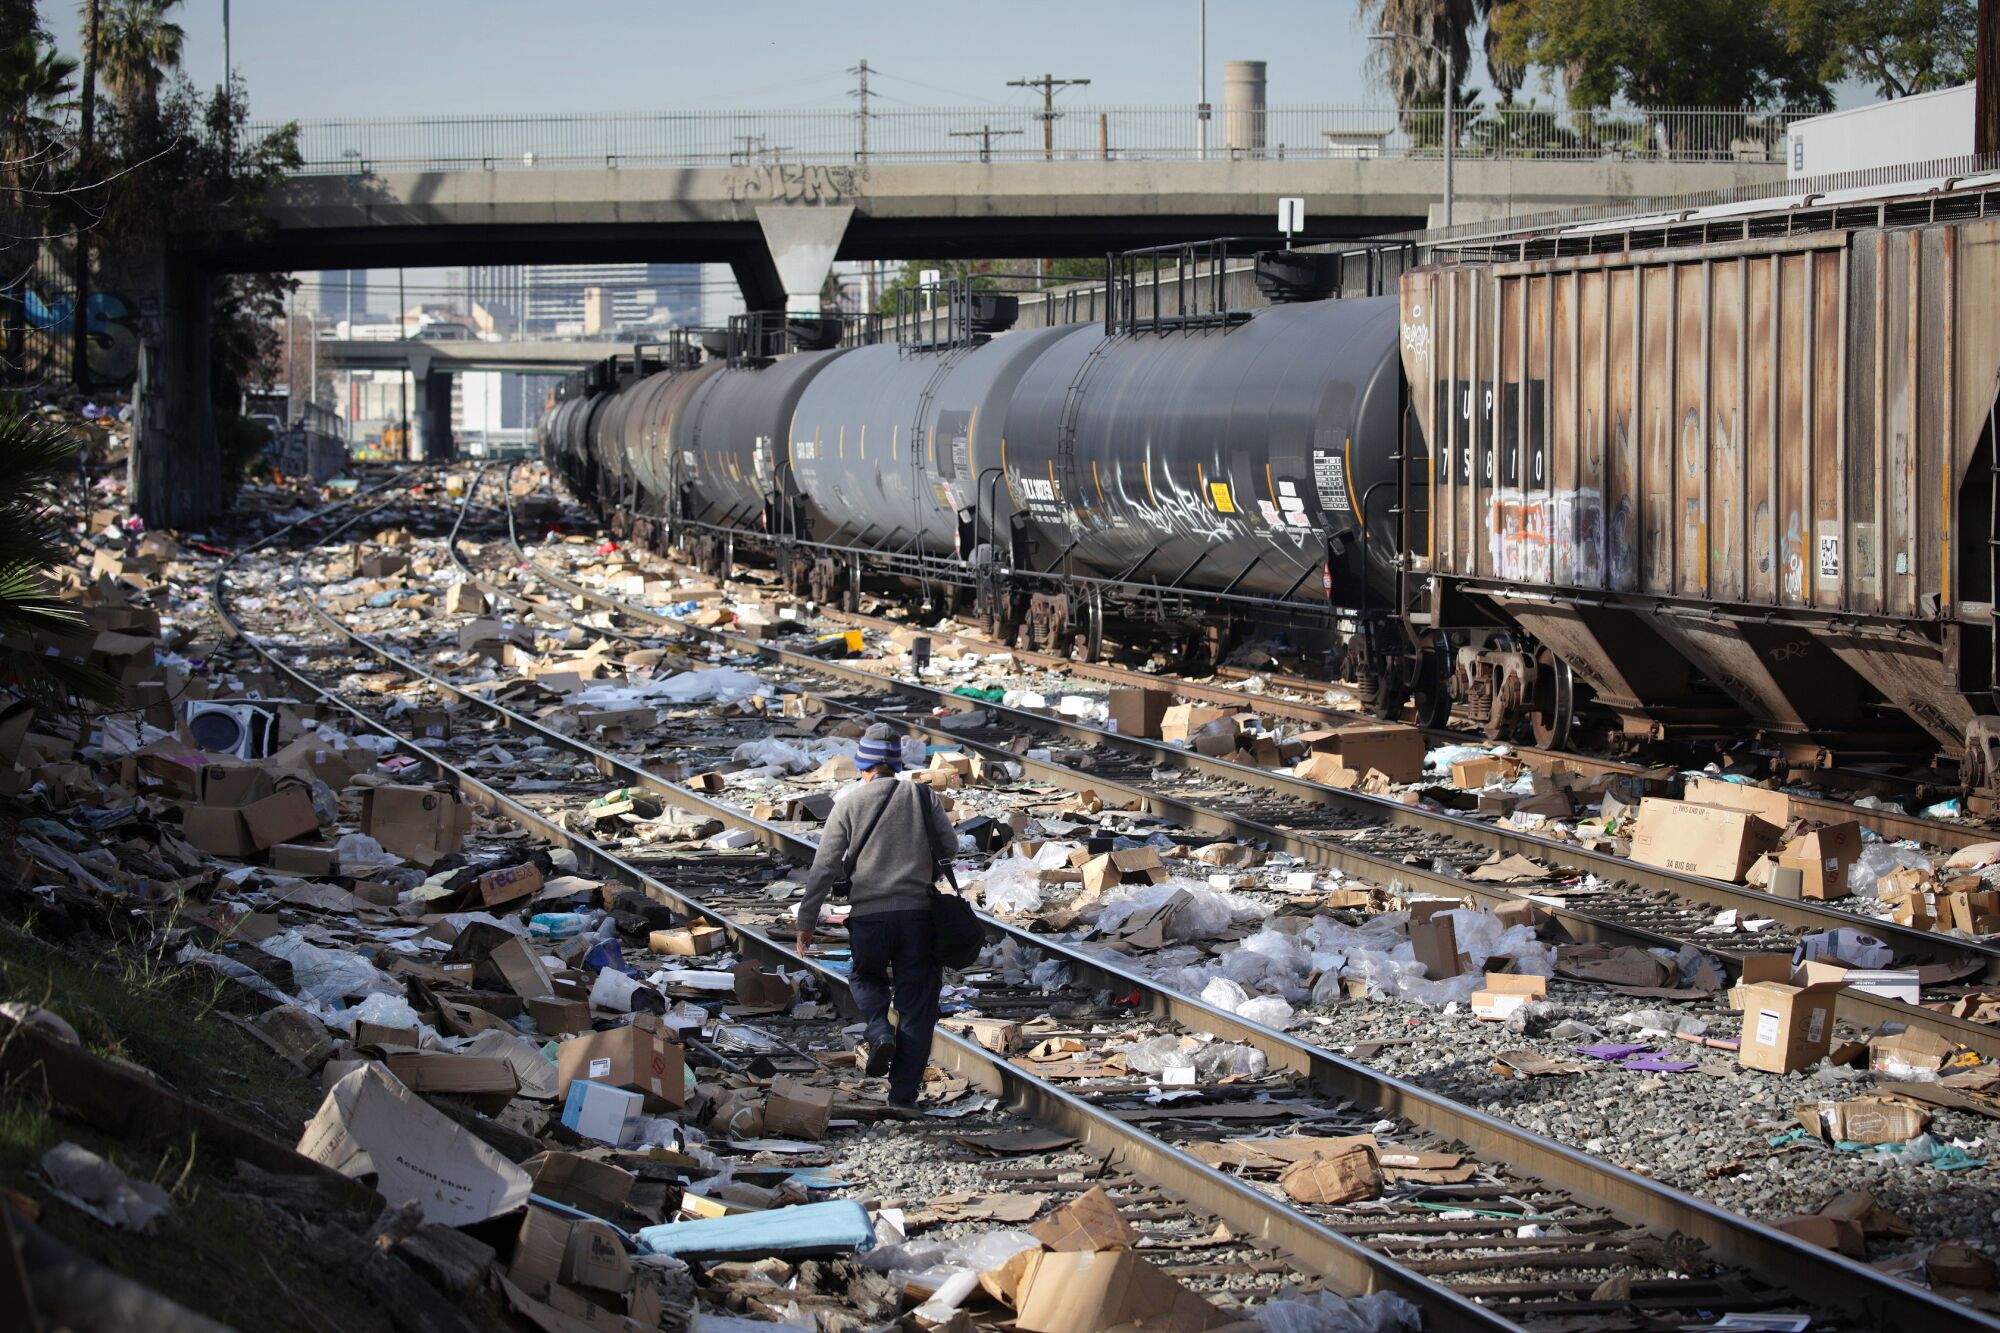 A man walks along a section of Union Pacific train tracks in downtown Los Angeles.